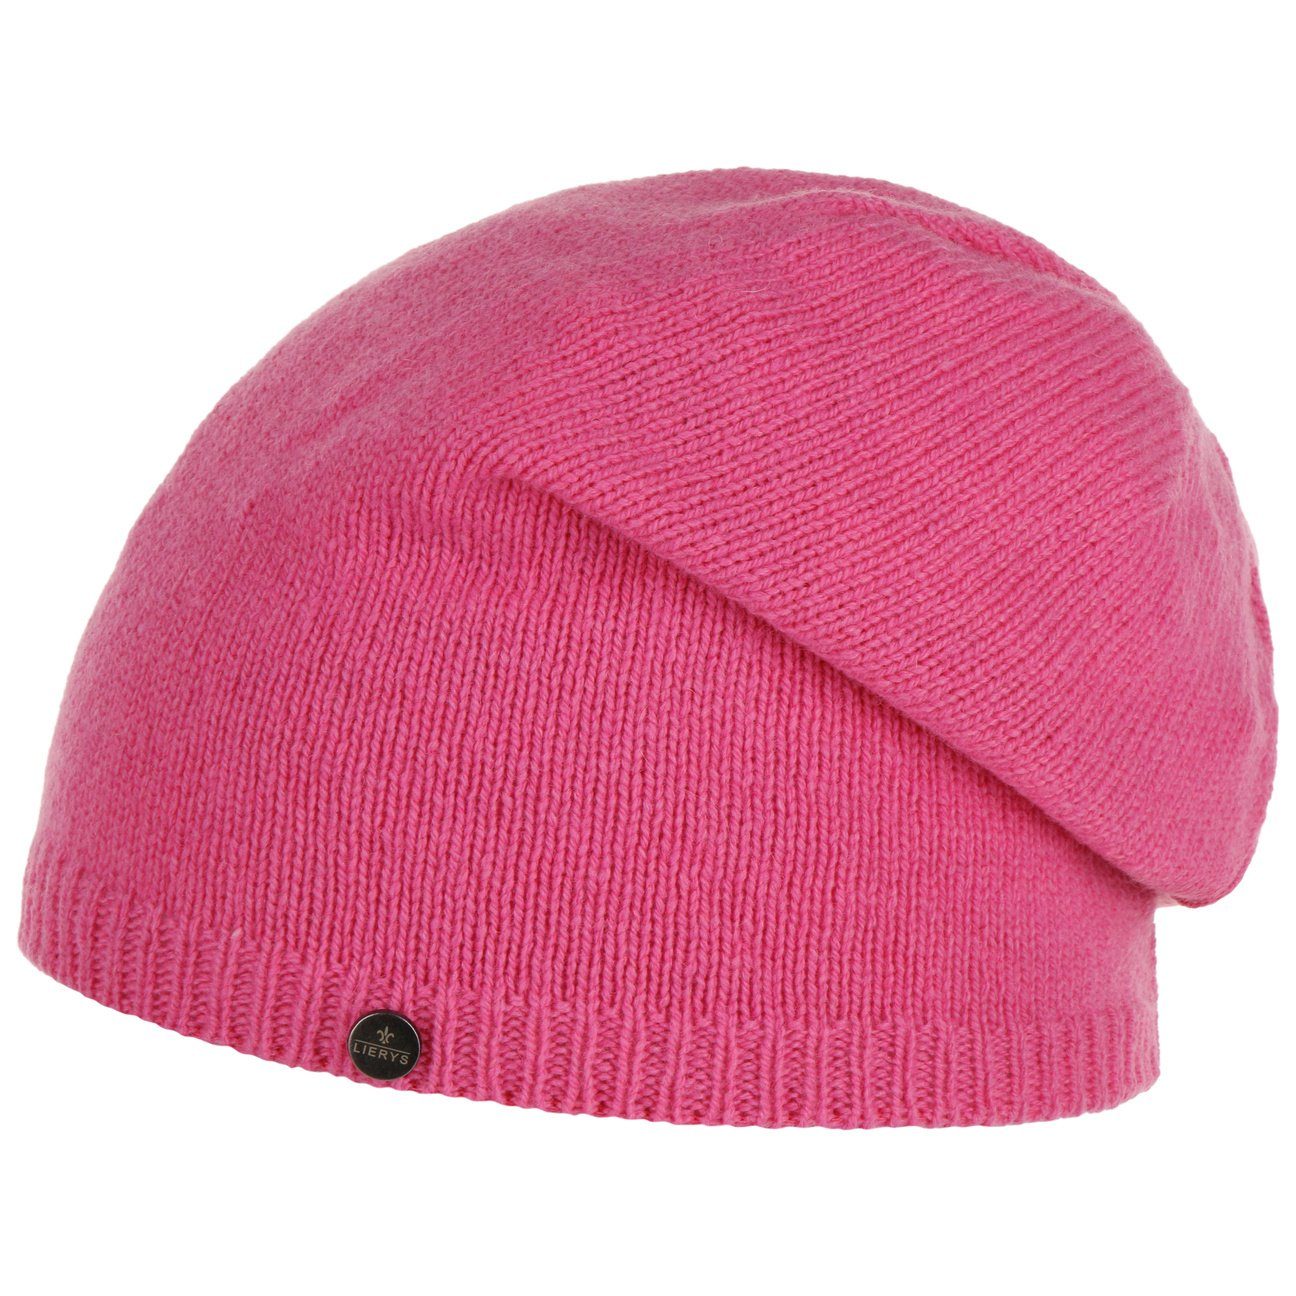 Lierys Beanie (1-St) Beanie Oversize, Made in Germany pink | Beanies